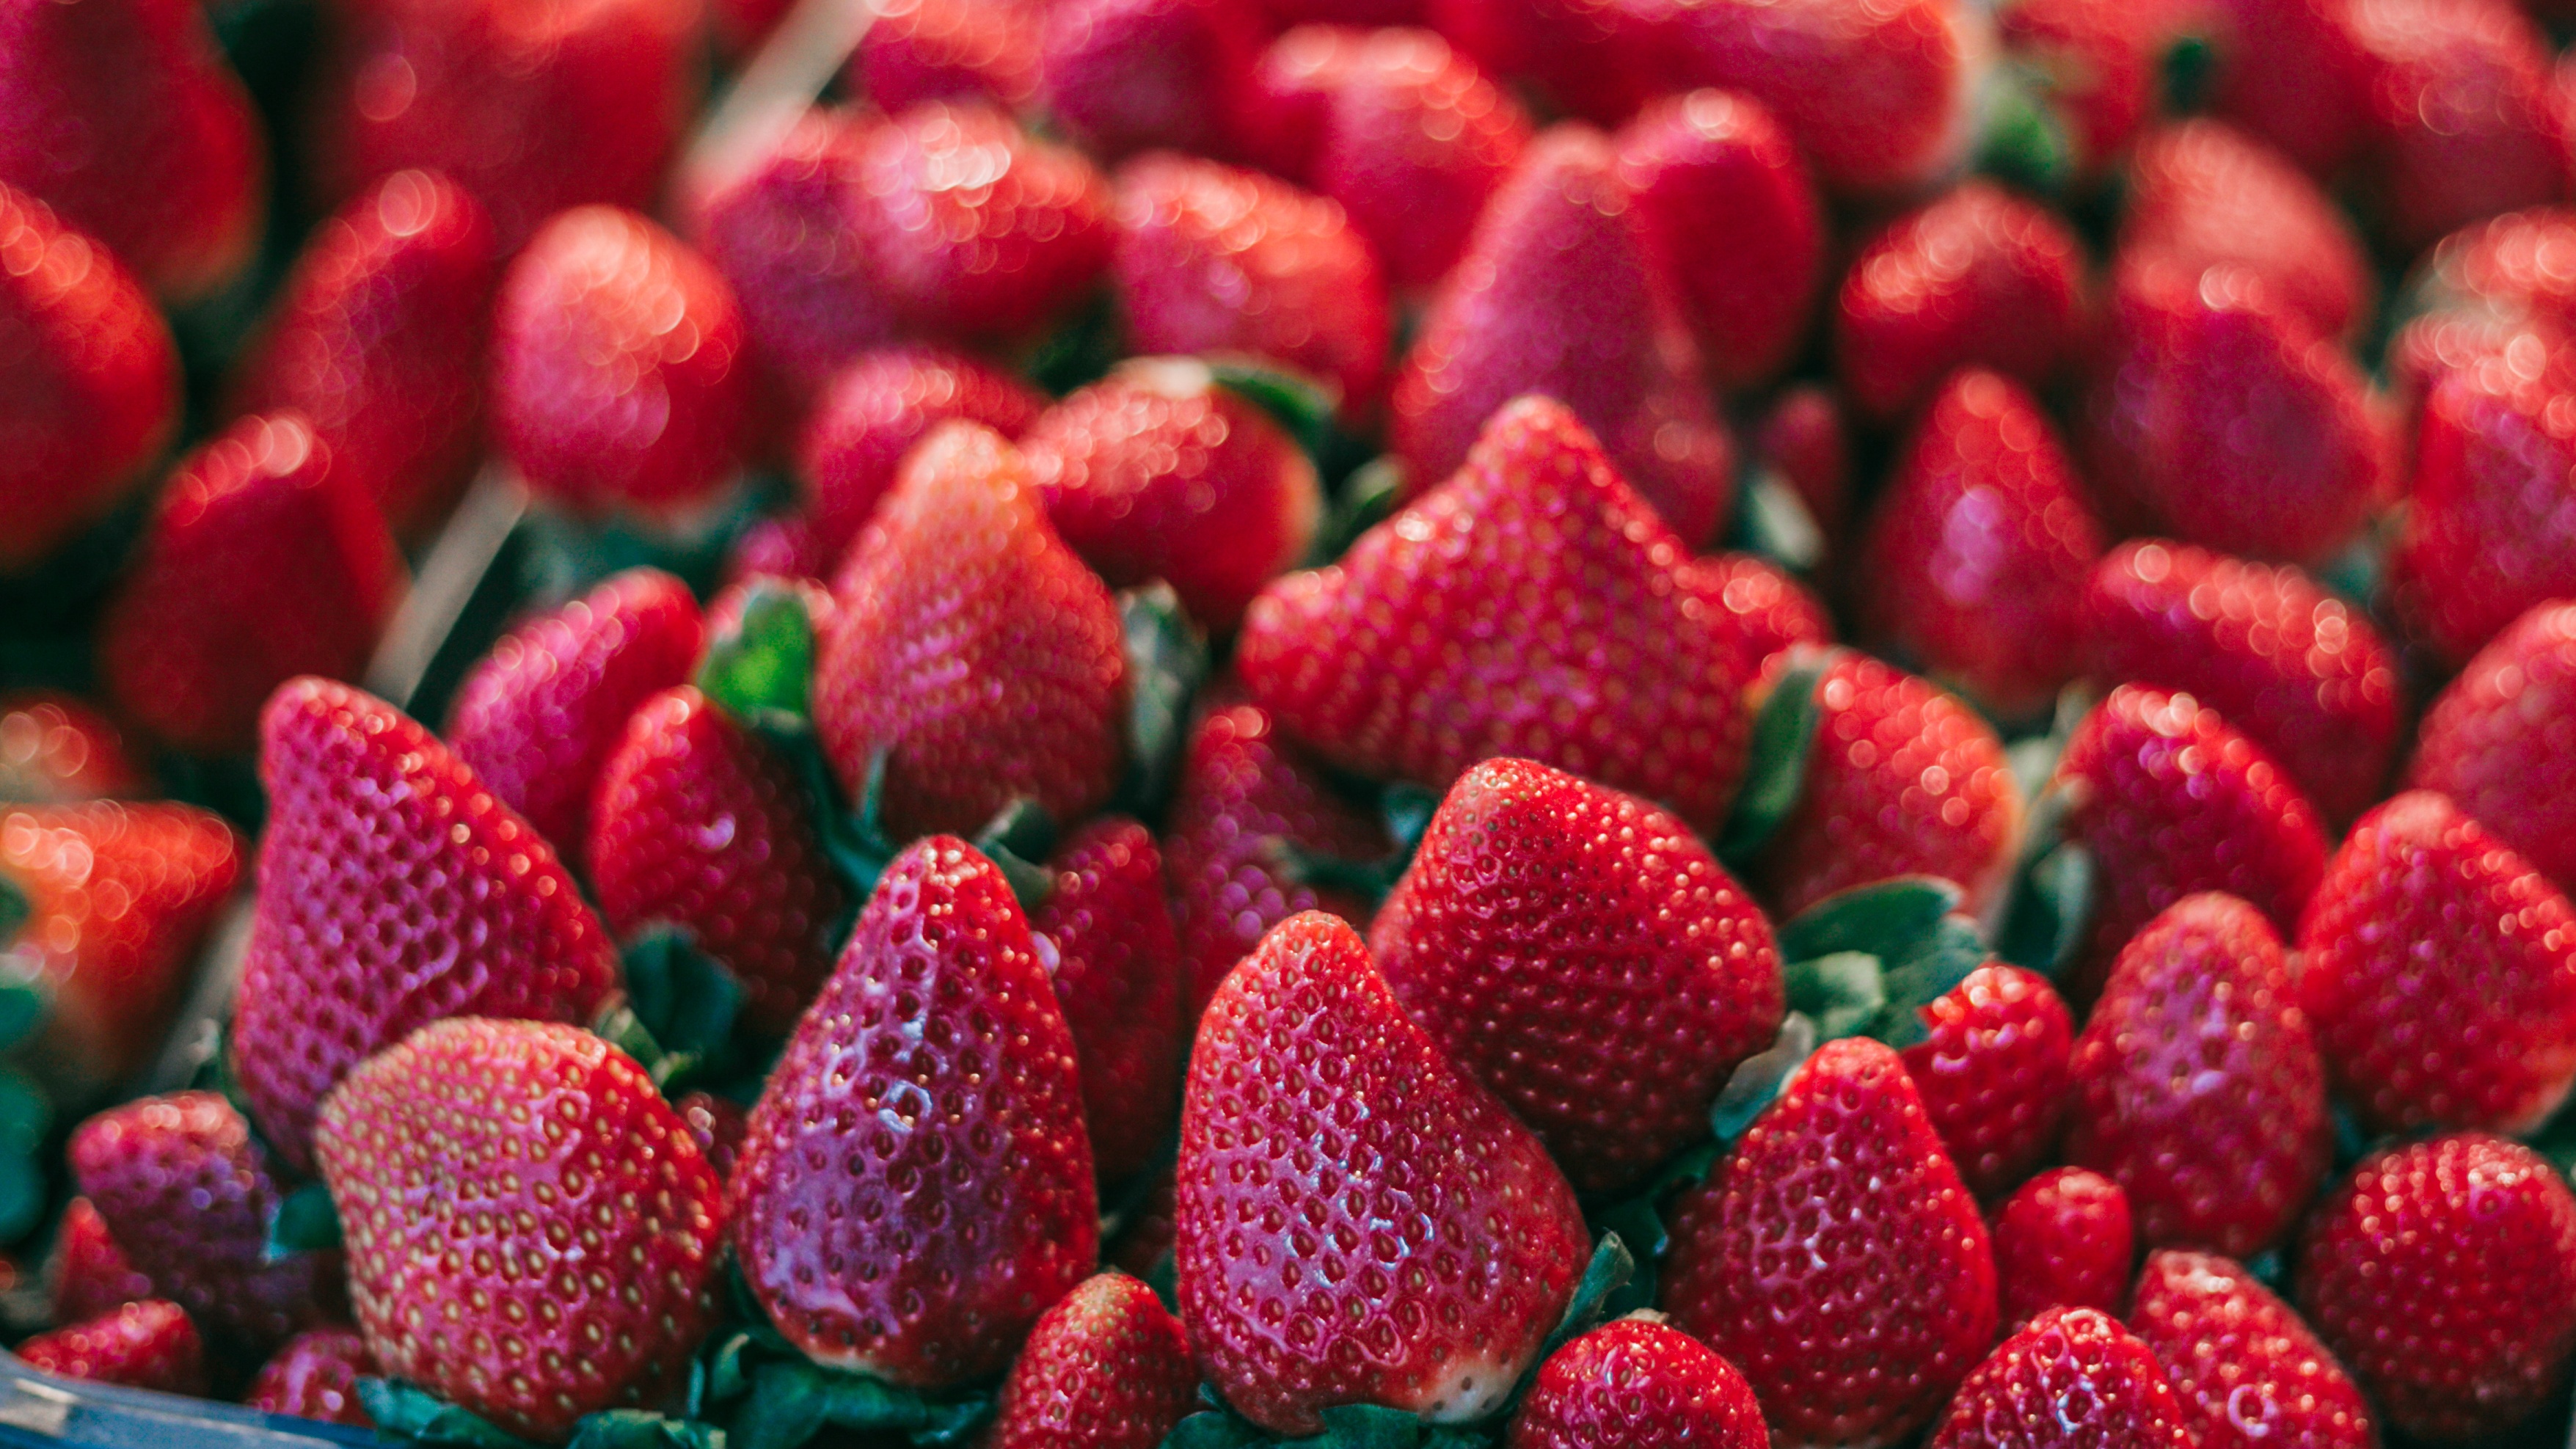  How strawberries are funding crime in Sweden 